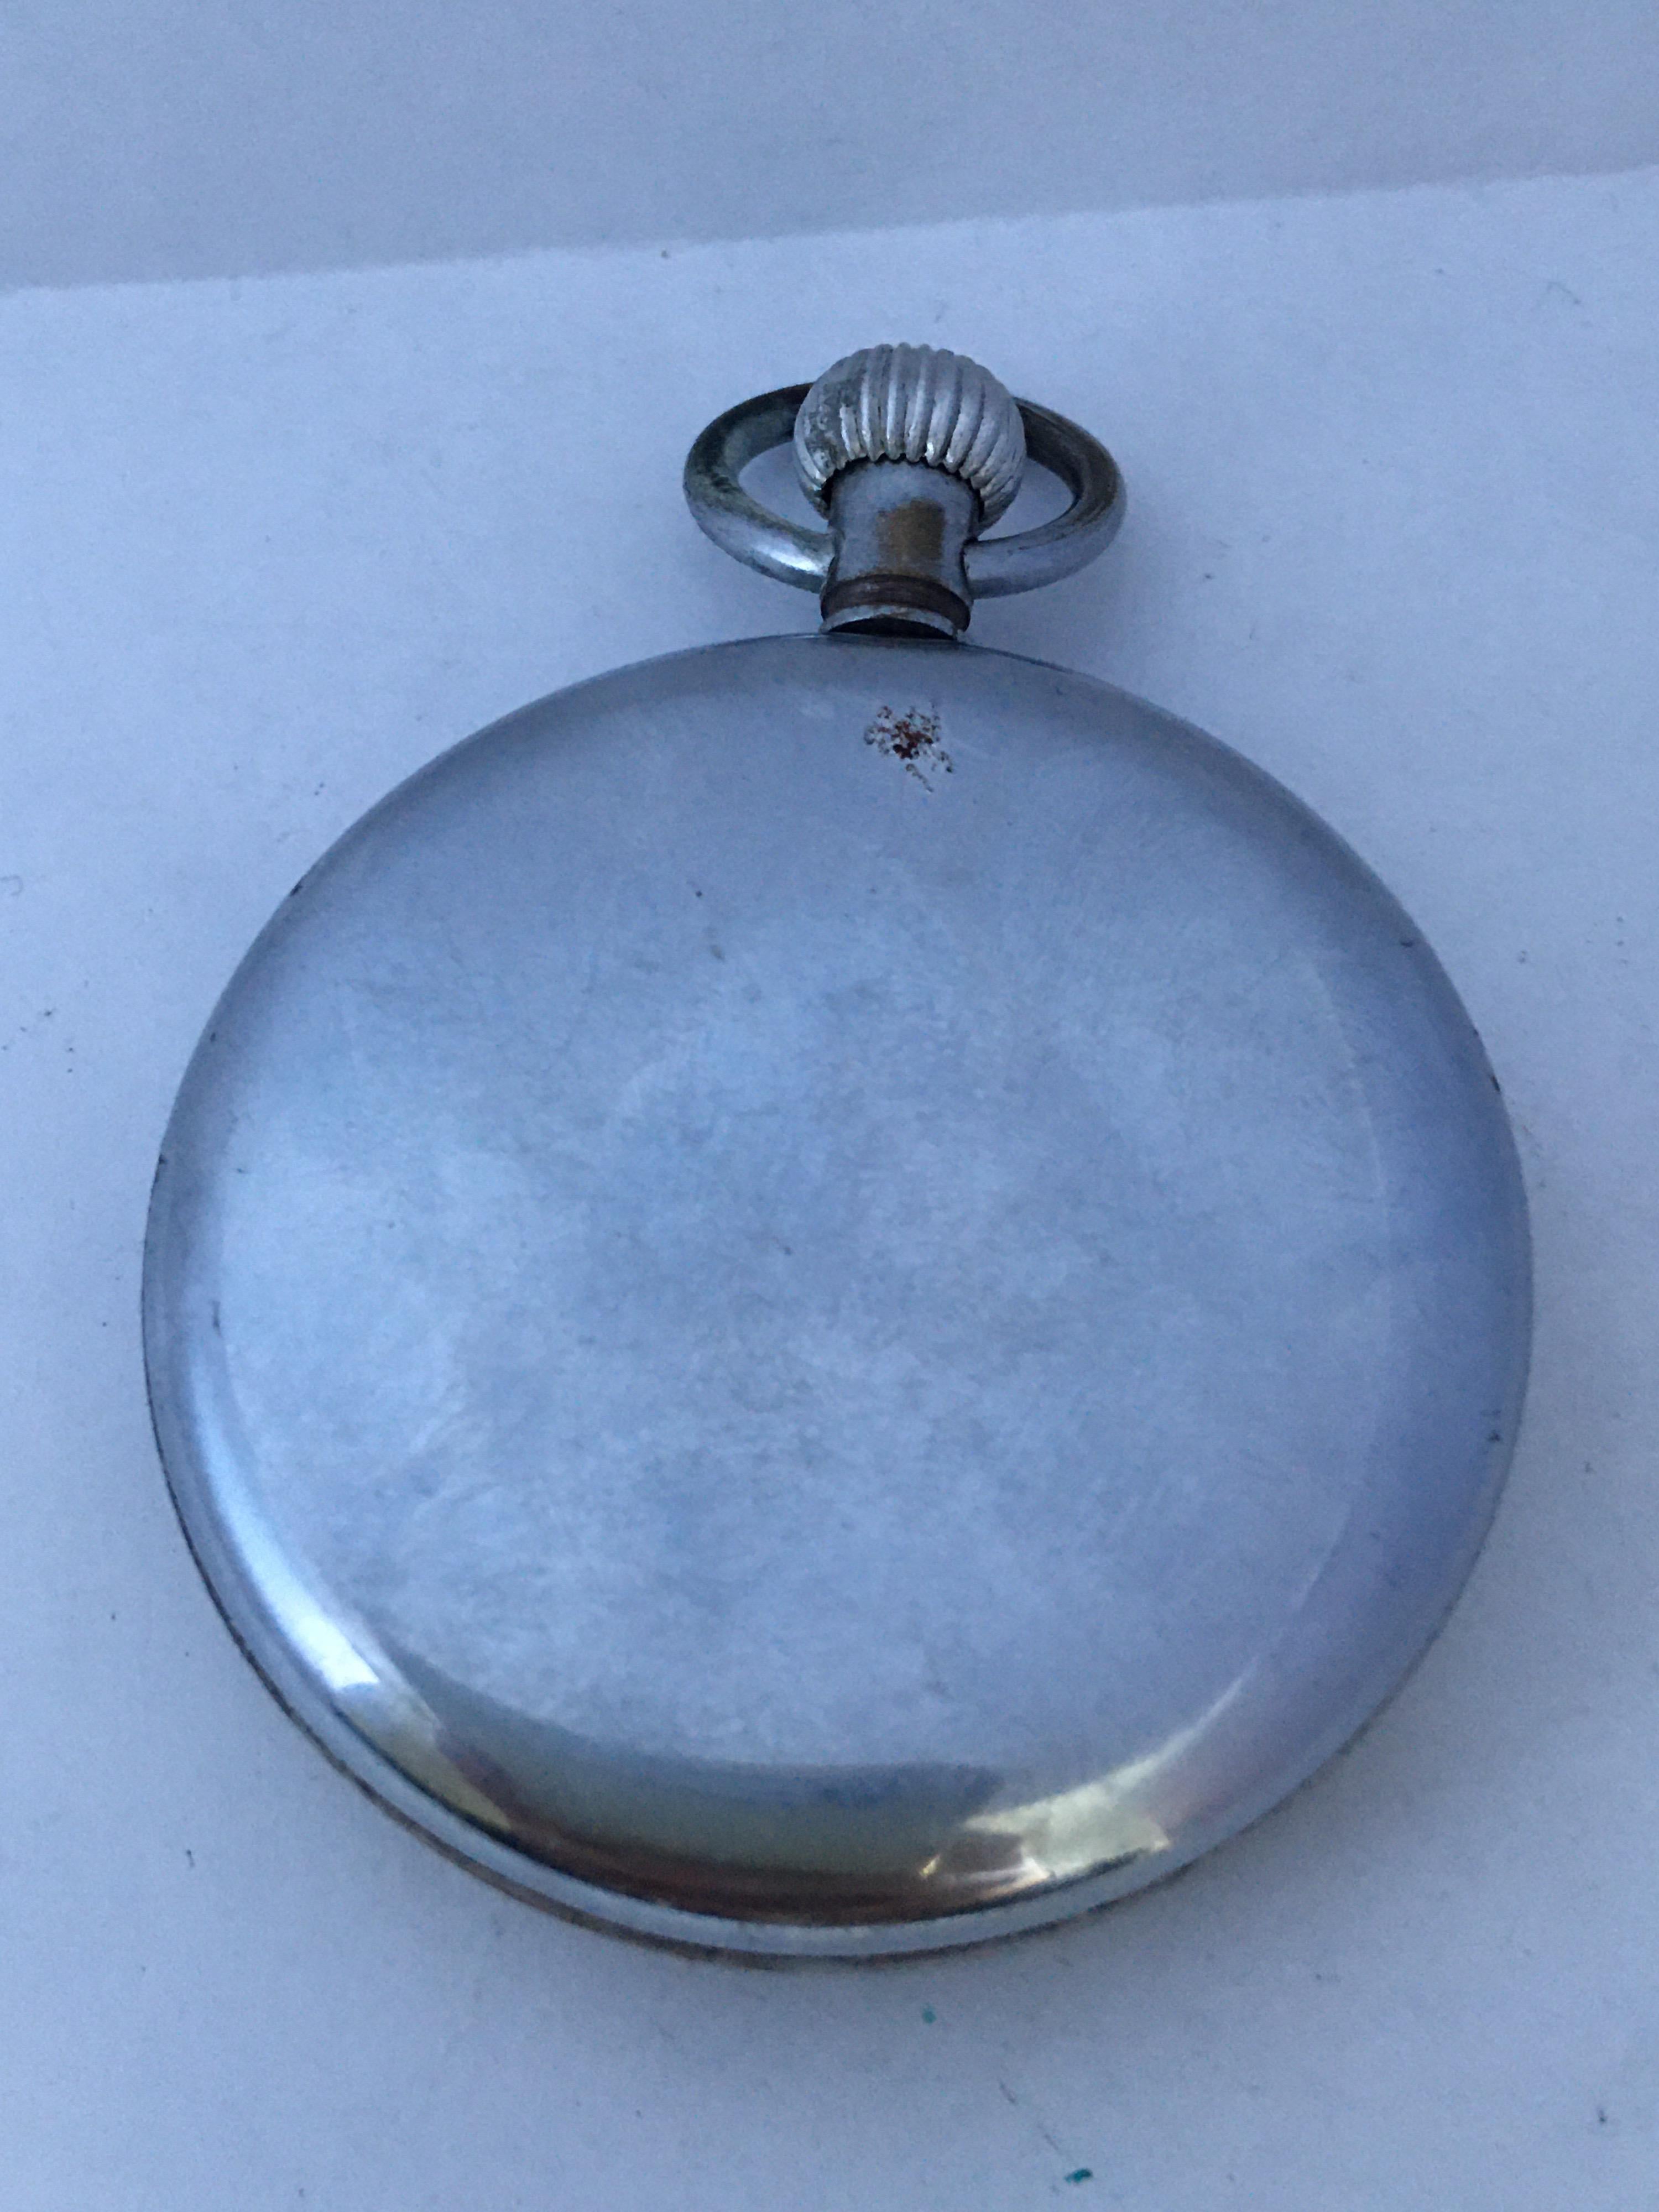 This pre-owned antique sports recorder pocket watch is working and it is running well. Visible signs of wearing and has aged with the chrome metal case/ Bessel is tarnished as shown. Please study the images carefully as form part of the